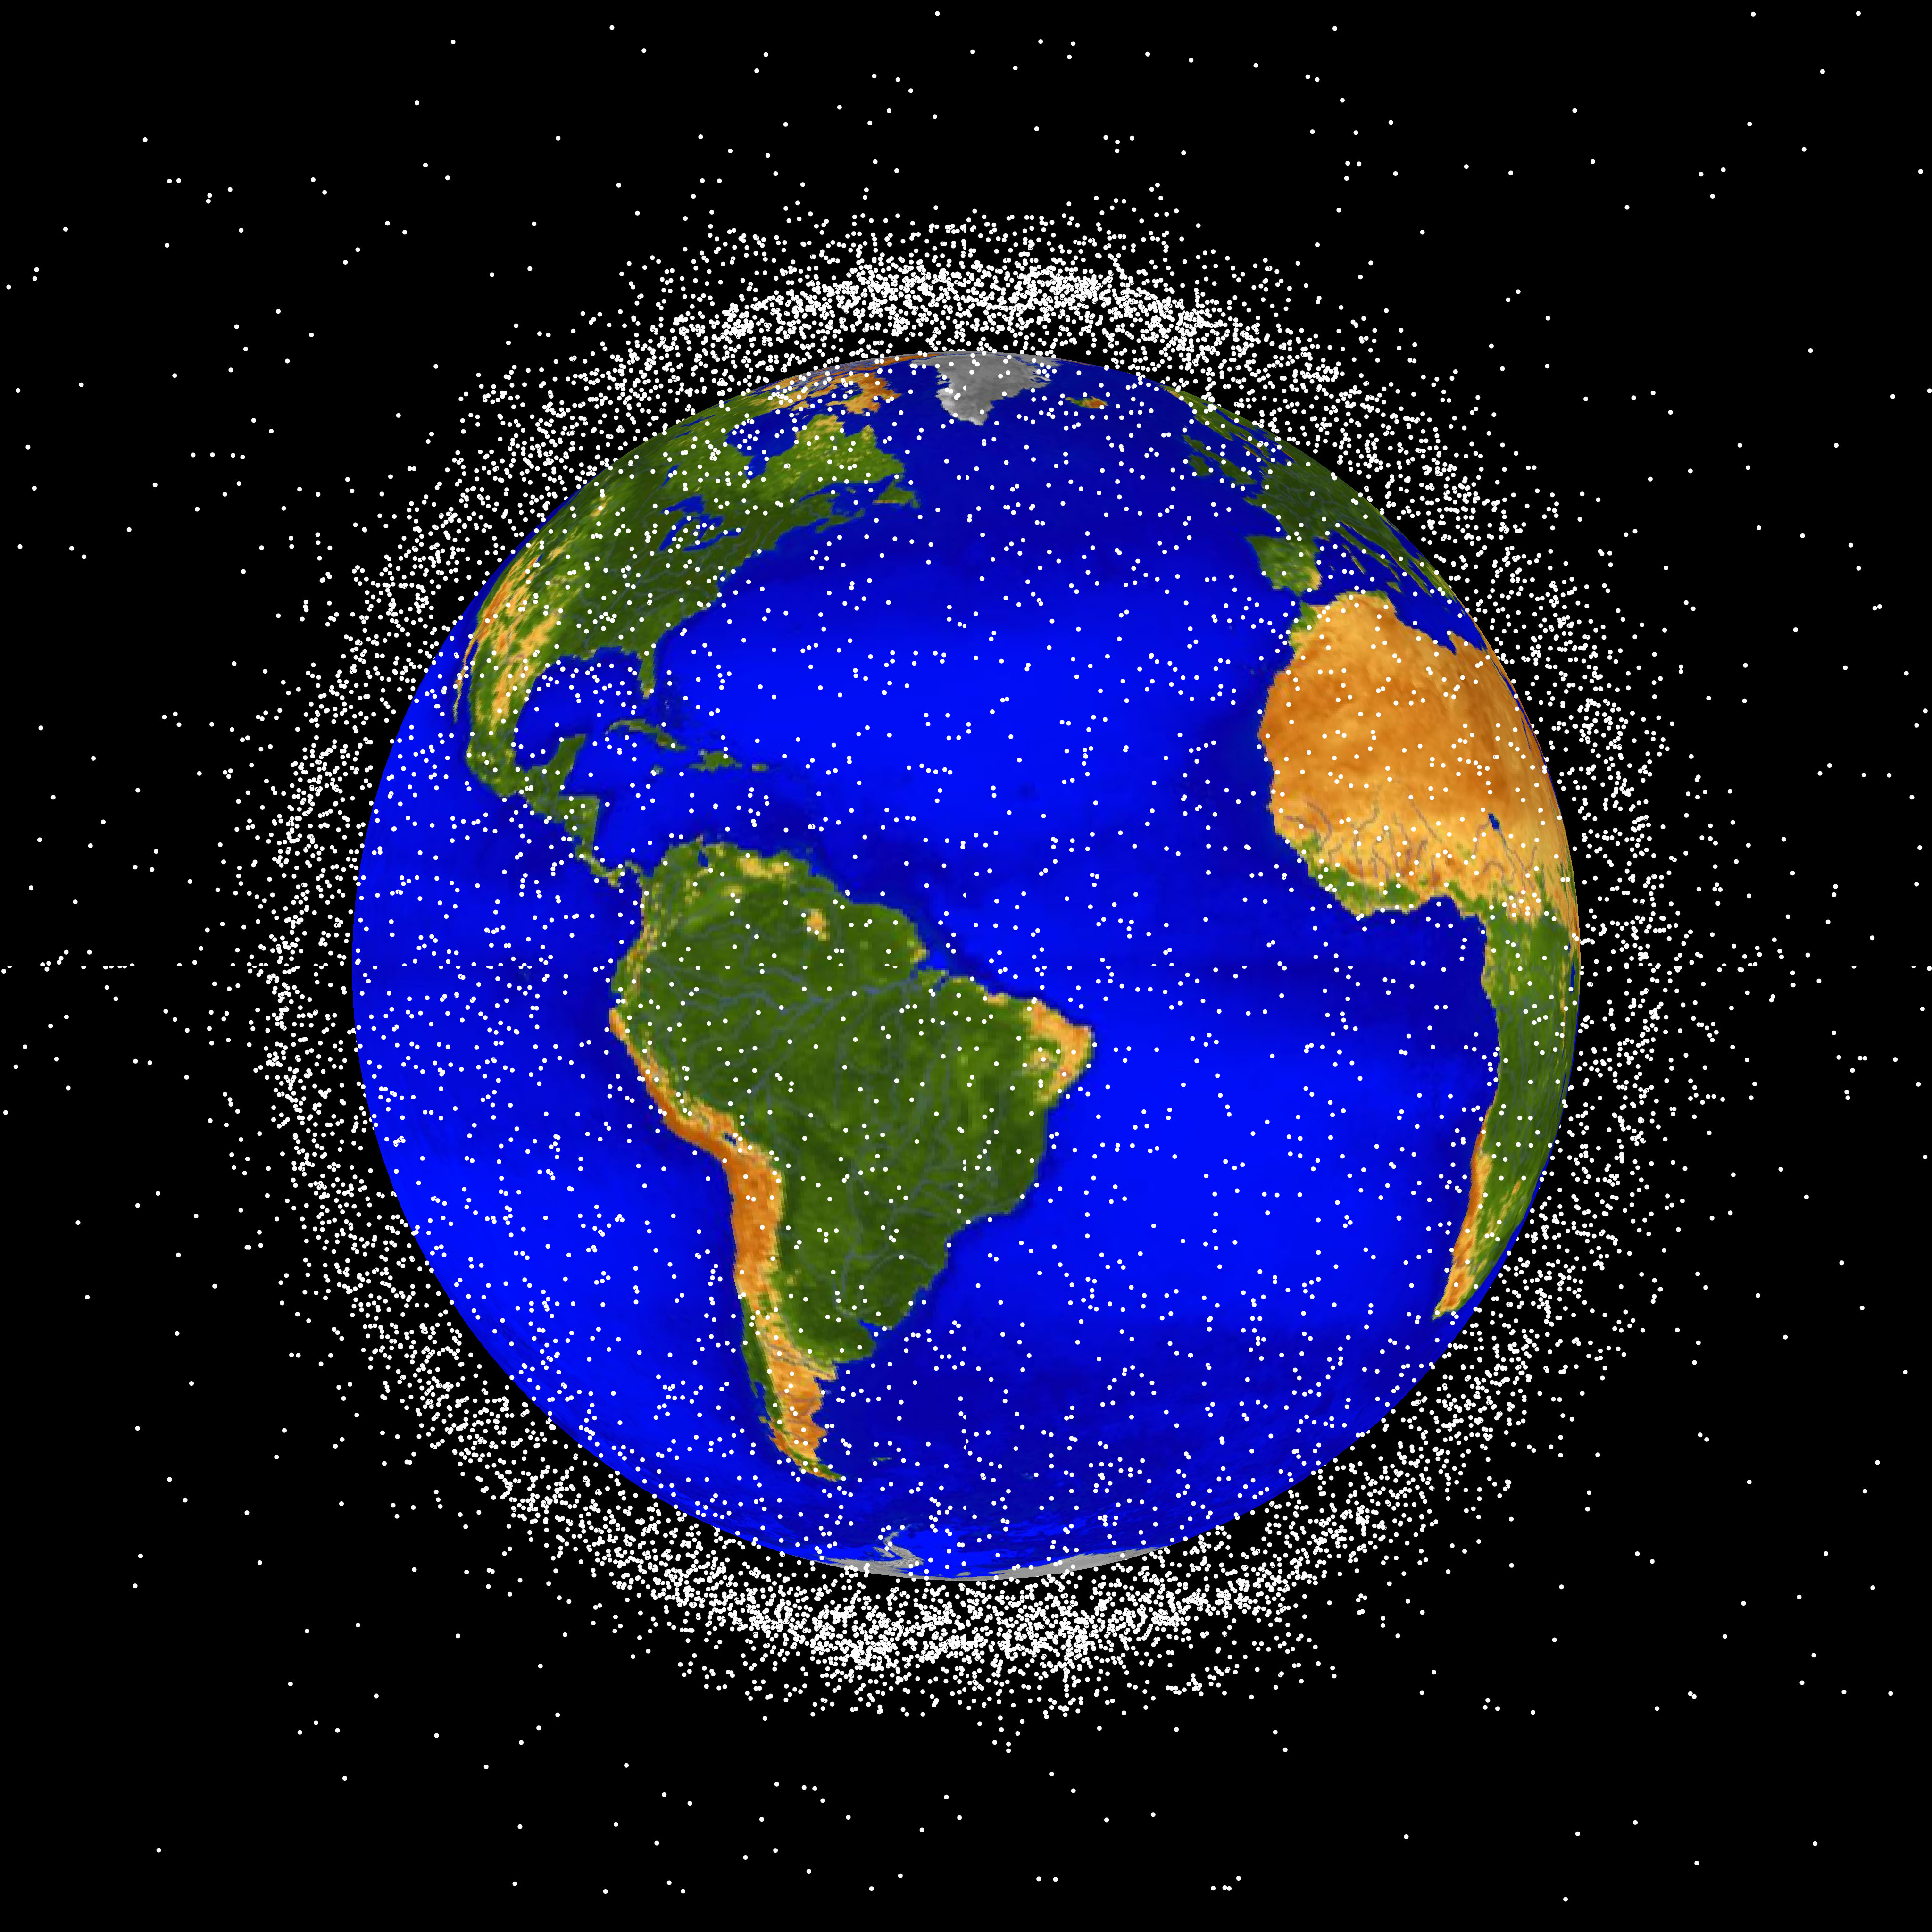 The space junk appears as many small white points surrounding Earth, which has bright blue oceans and green and brown continents.  The space junk is thick enough to form a cloud that obscures most of the black background when viewed from the edges around Earth